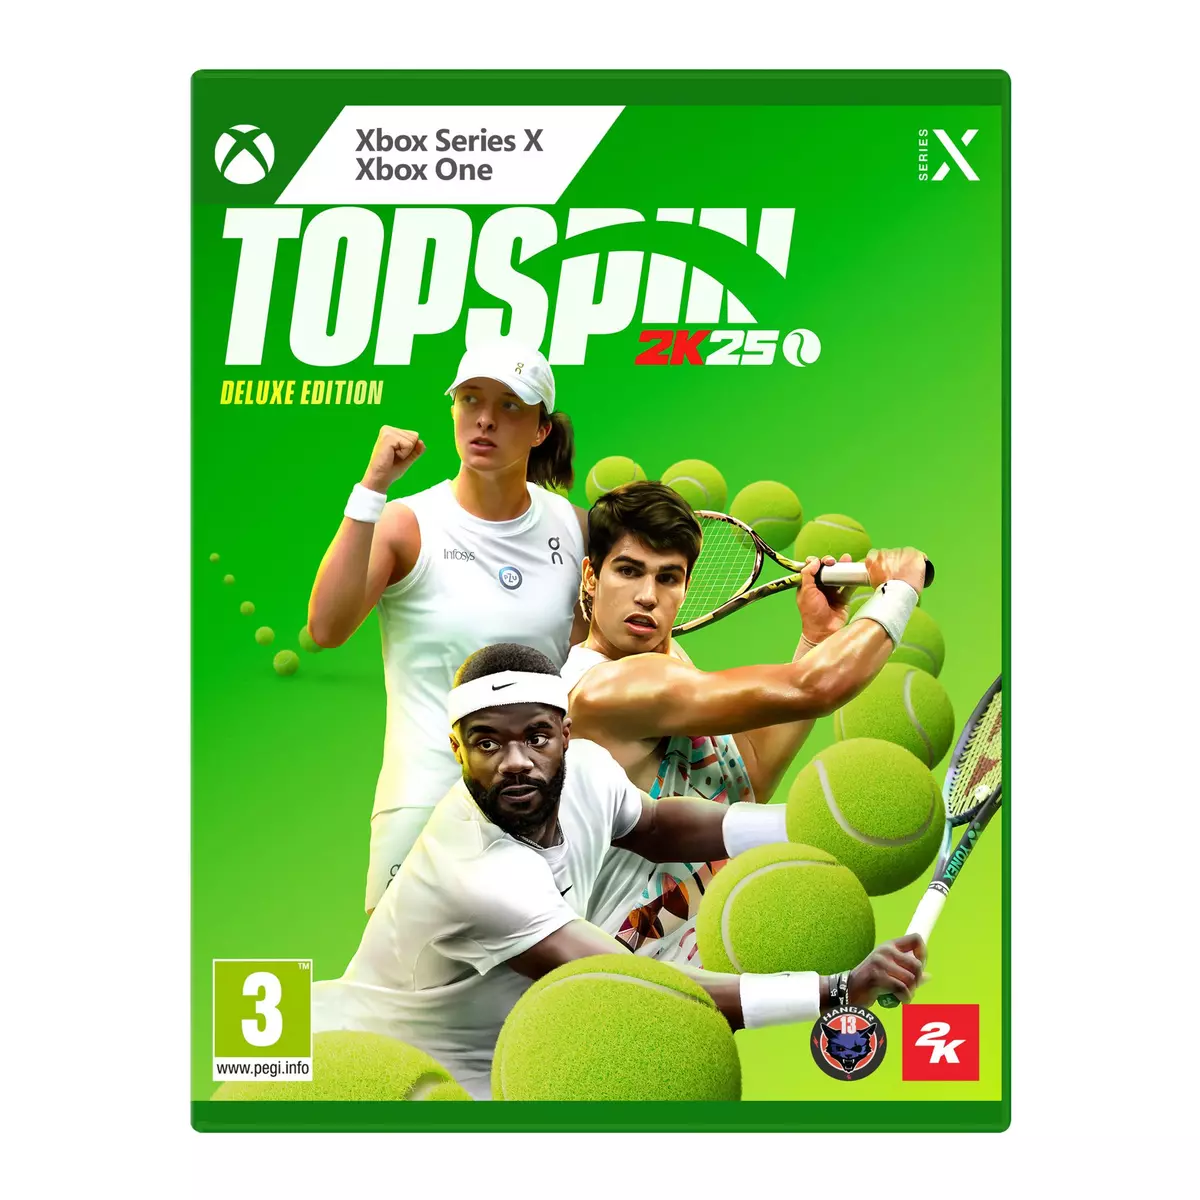 TopSpin 2K25 - Deluxe Edition Xbox Series X